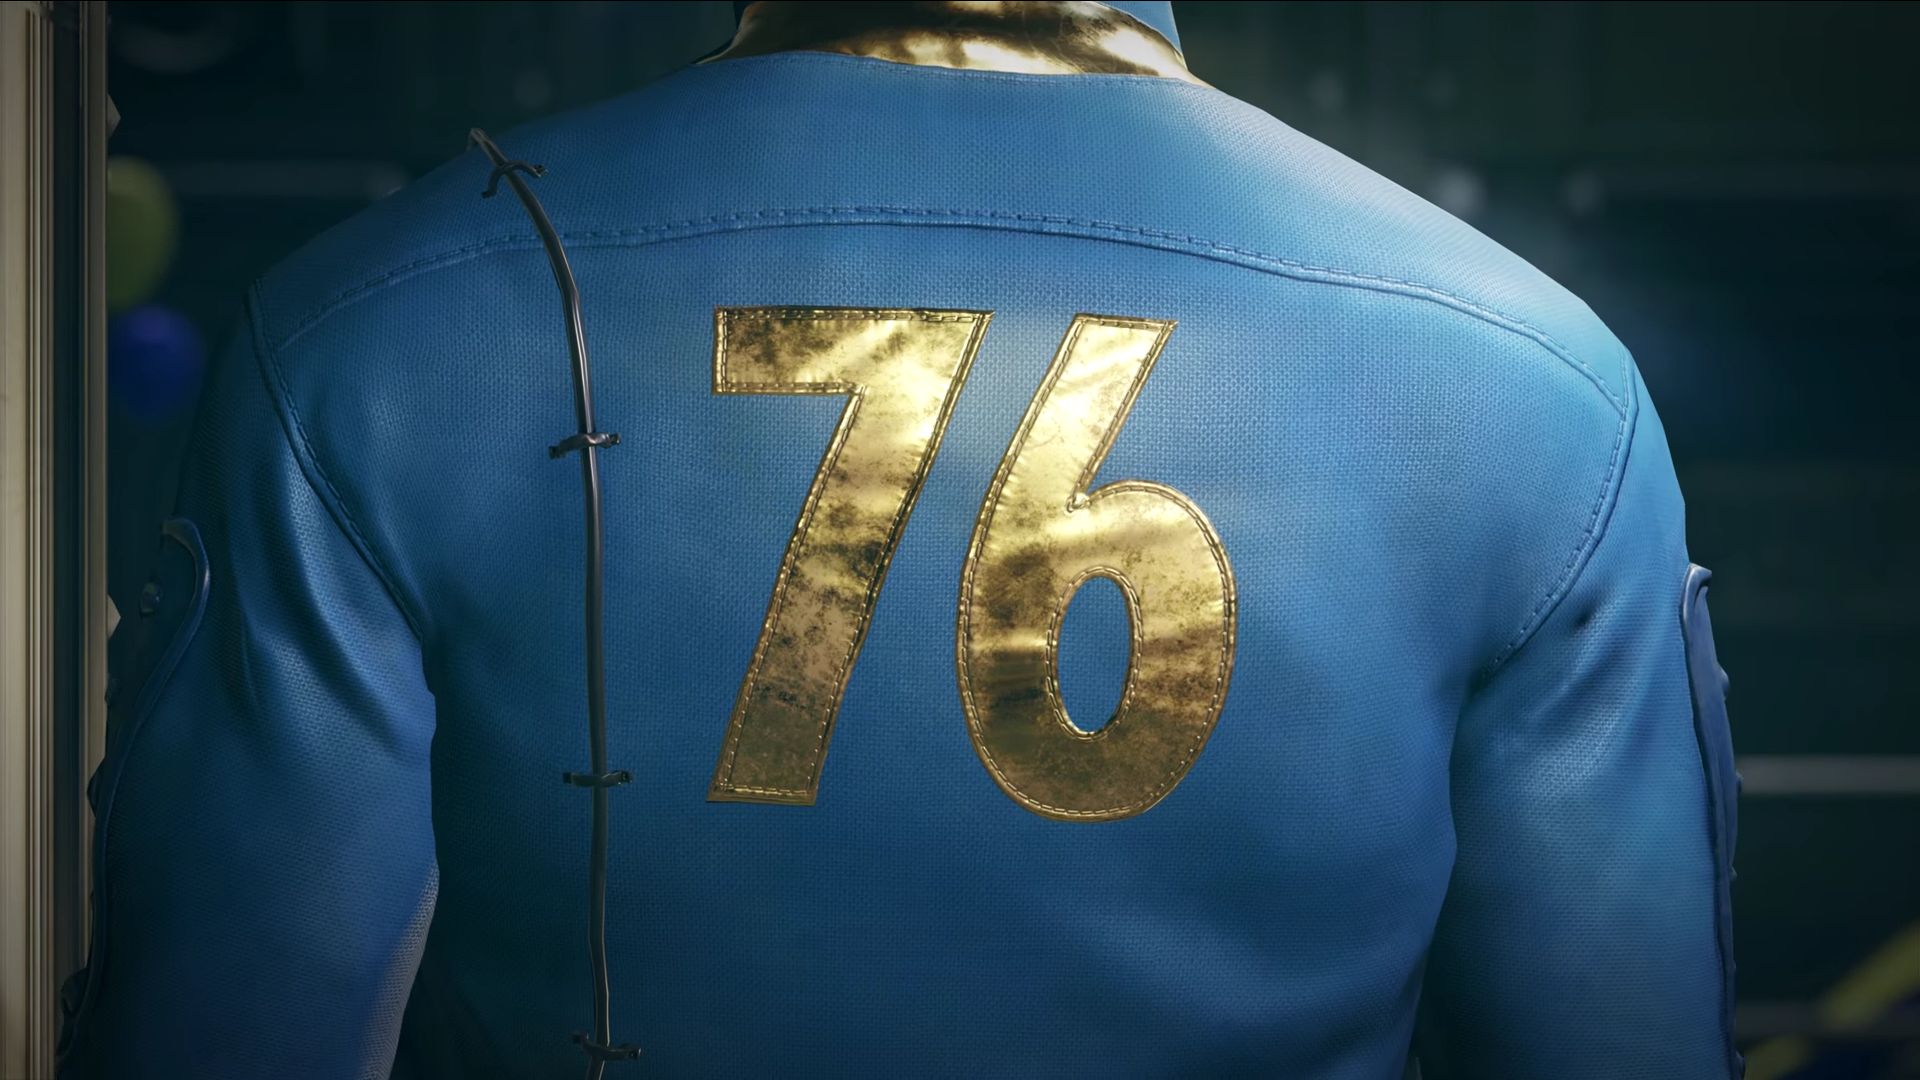 fallout 76, video game, fallout